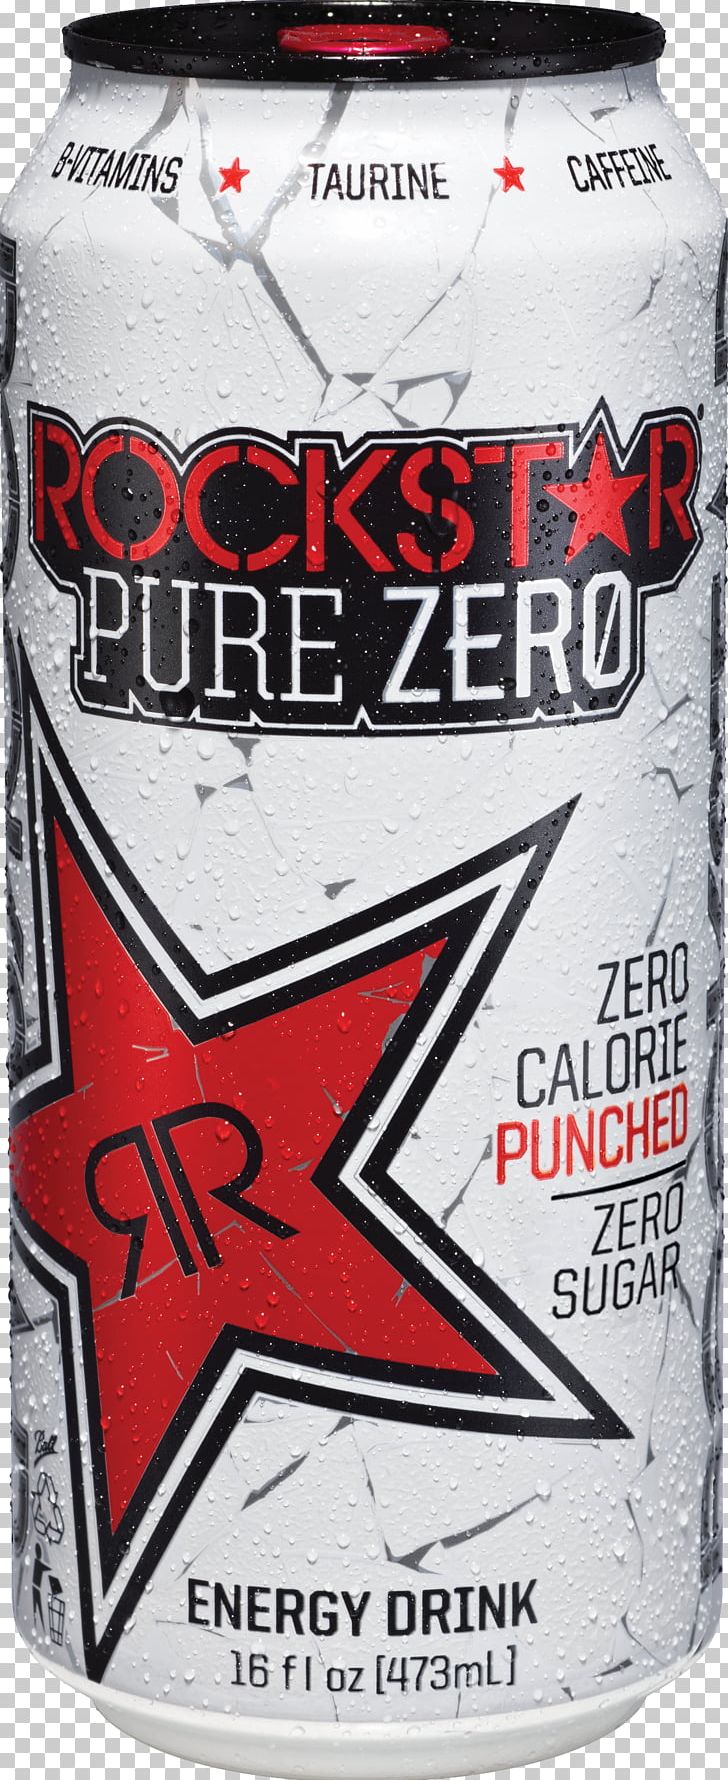 Sports & Energy Drinks Rockstar Punch Drink Can PNG, Clipart, Alcoholic Drink, Aluminum Can, Caffeine, Calorie, Coffee Free PNG Download